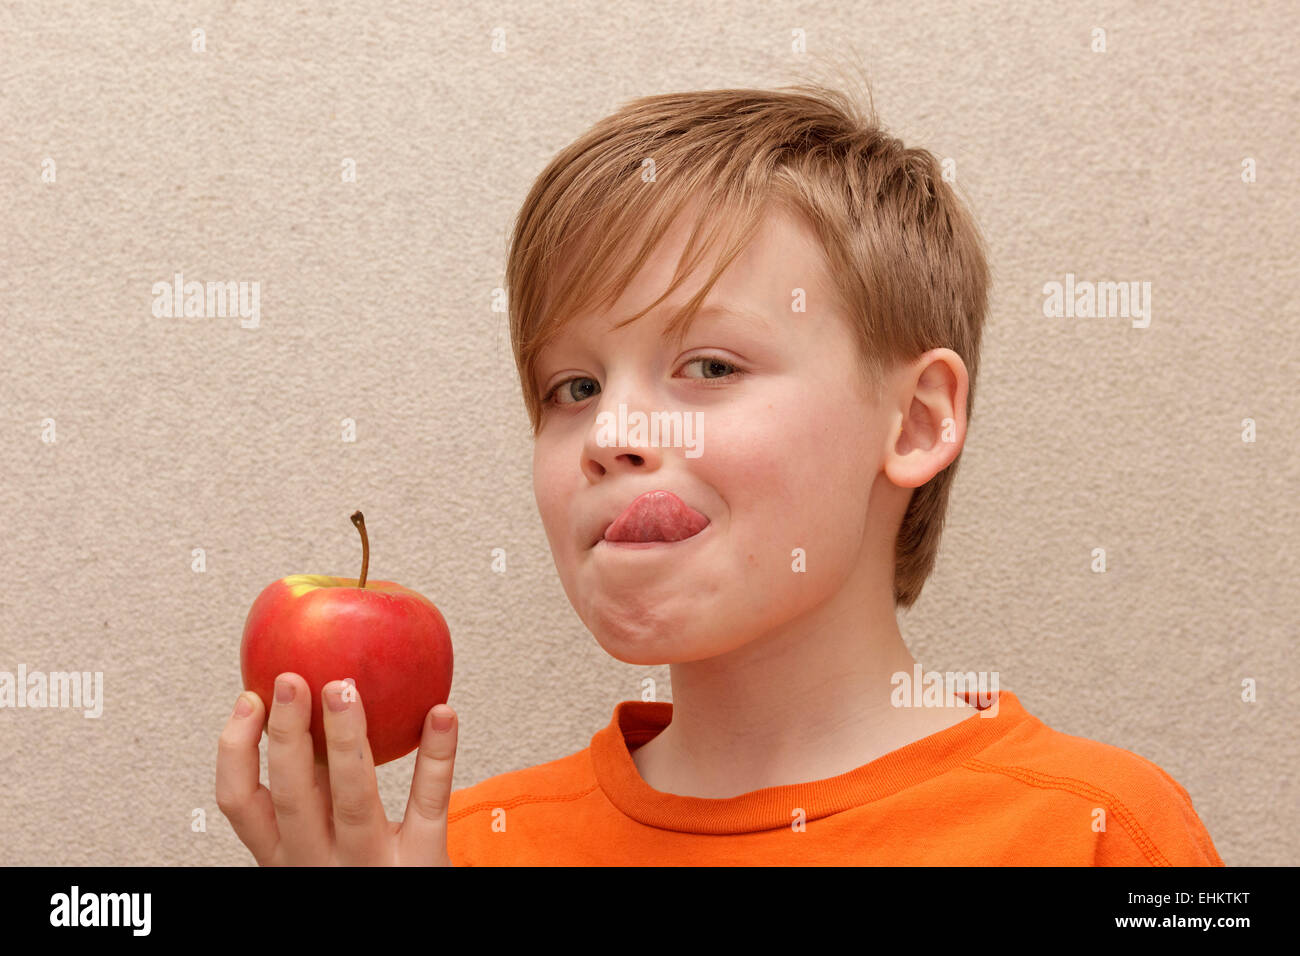 boy with apple licking his tongue Stock Photo